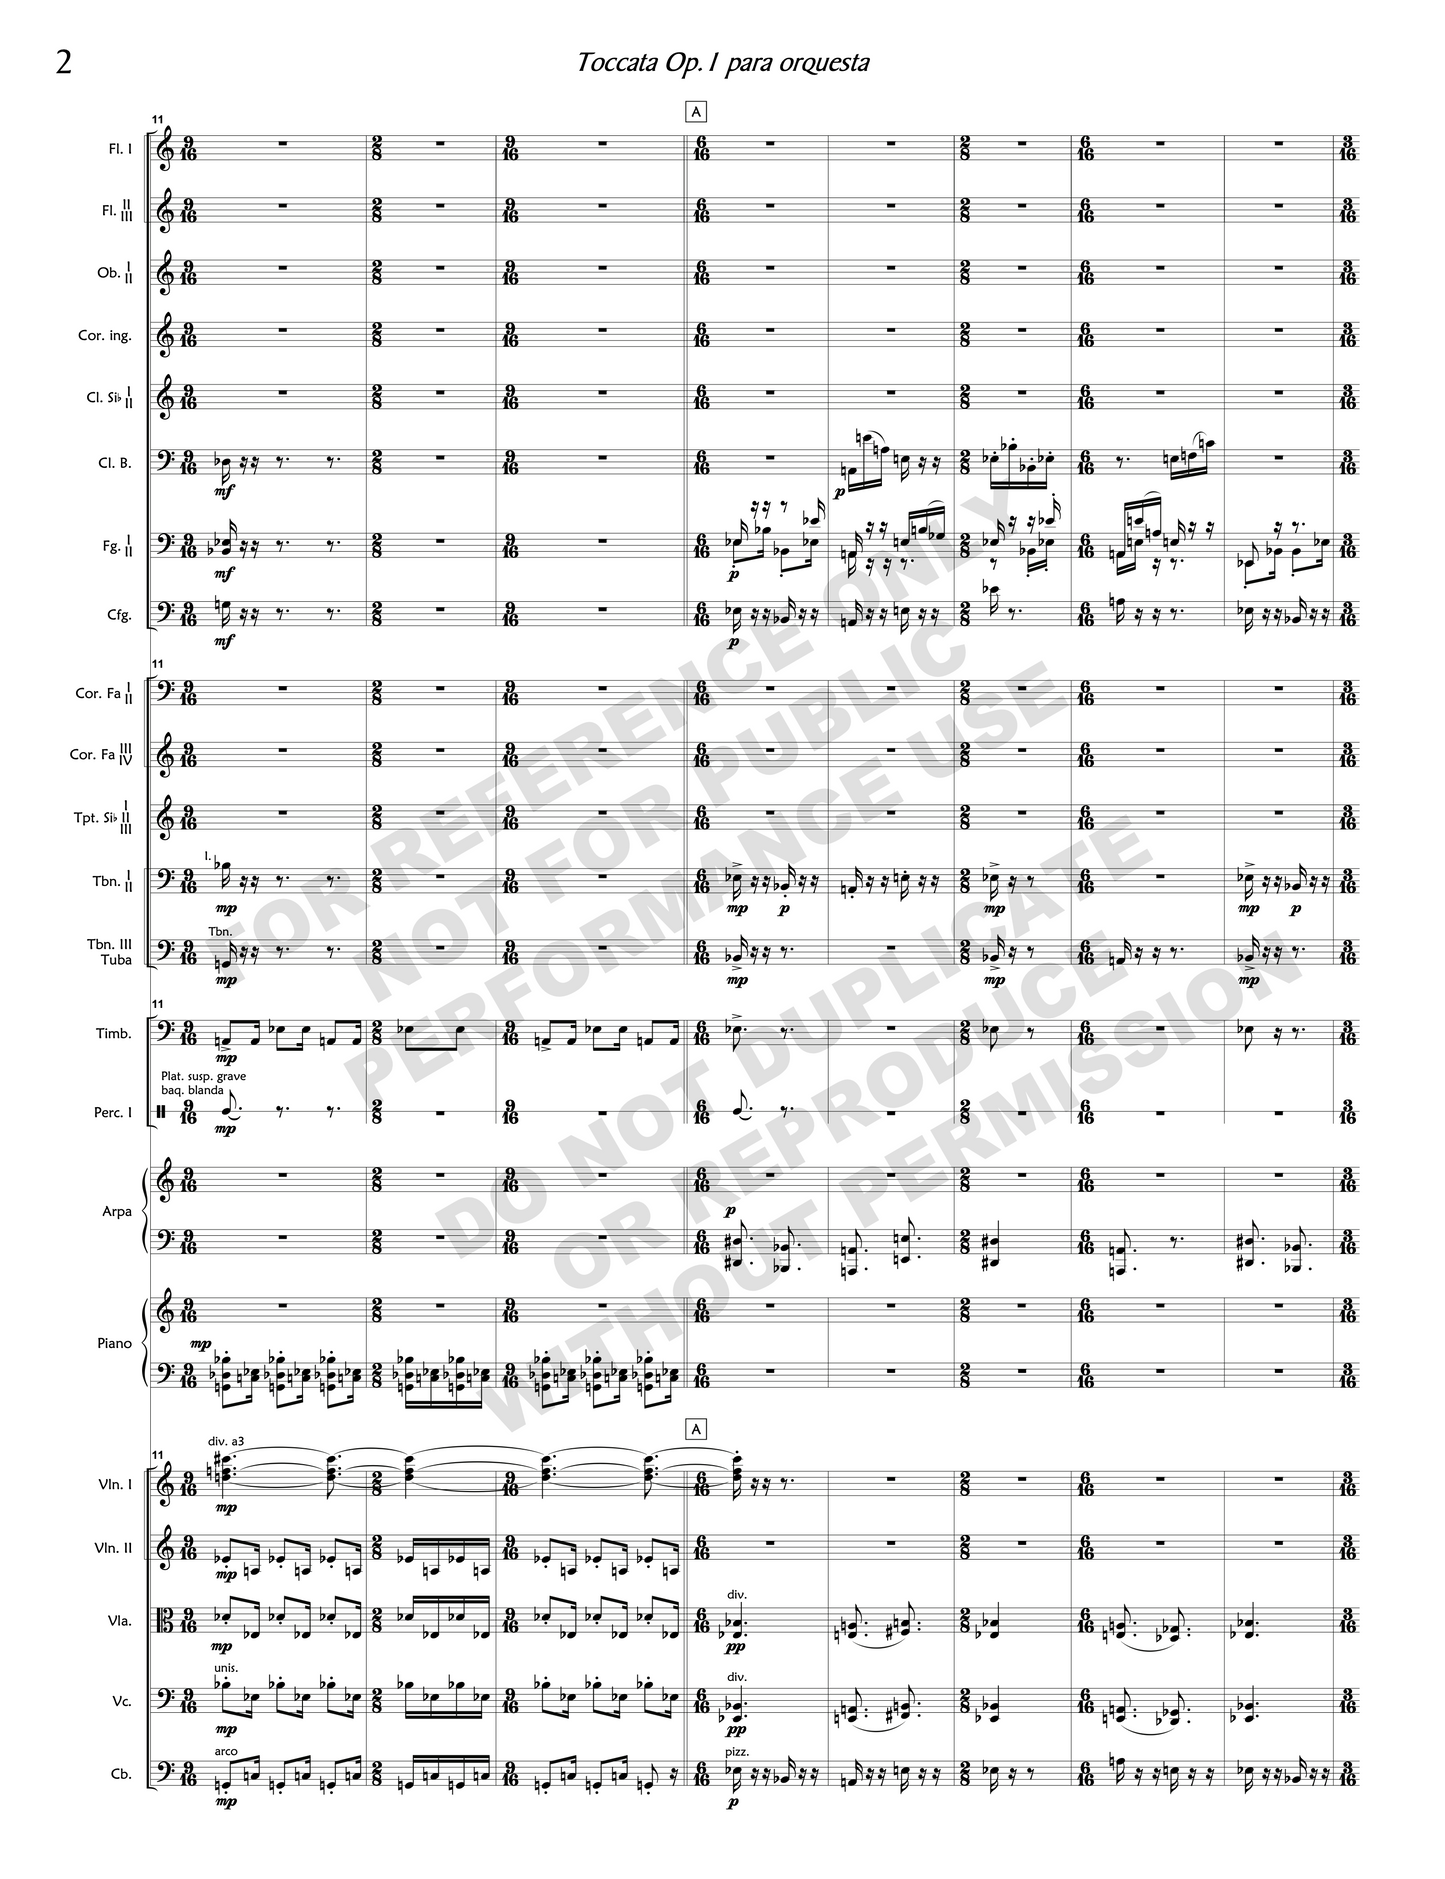 Tocatta Op. 1, for orchestra